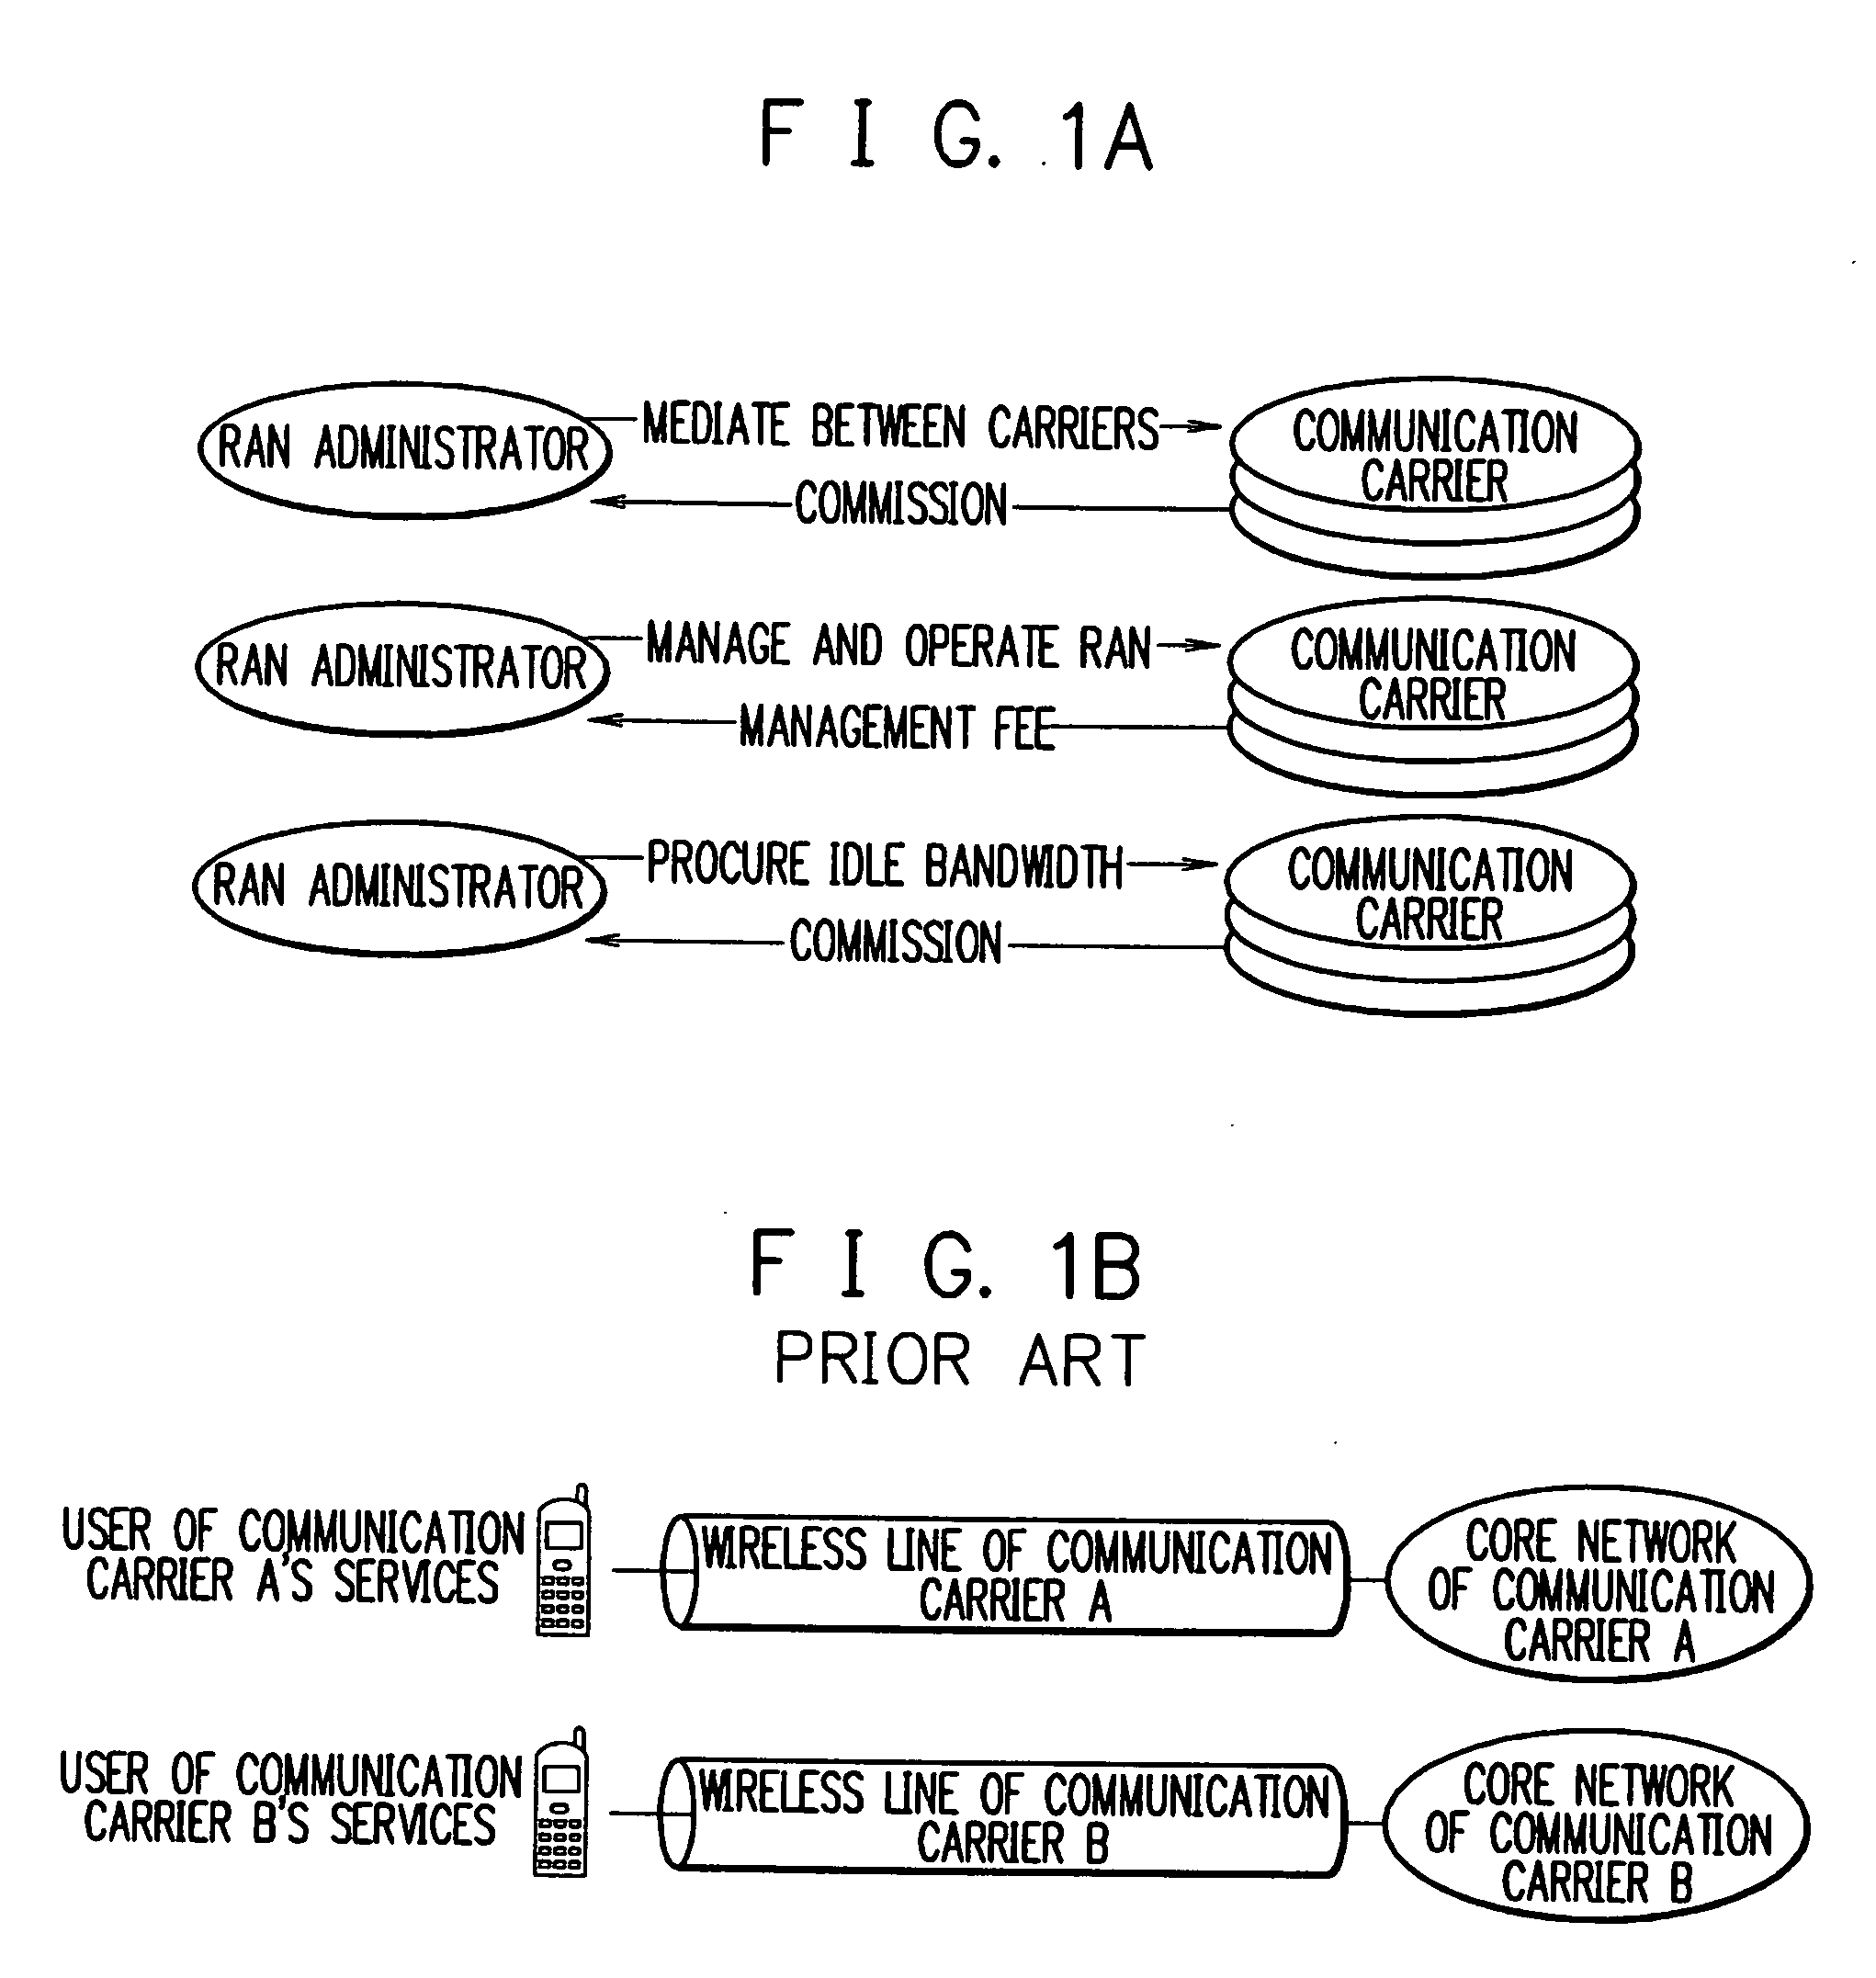 Wireless line sharing network system, and administrative apparatus and method thereof